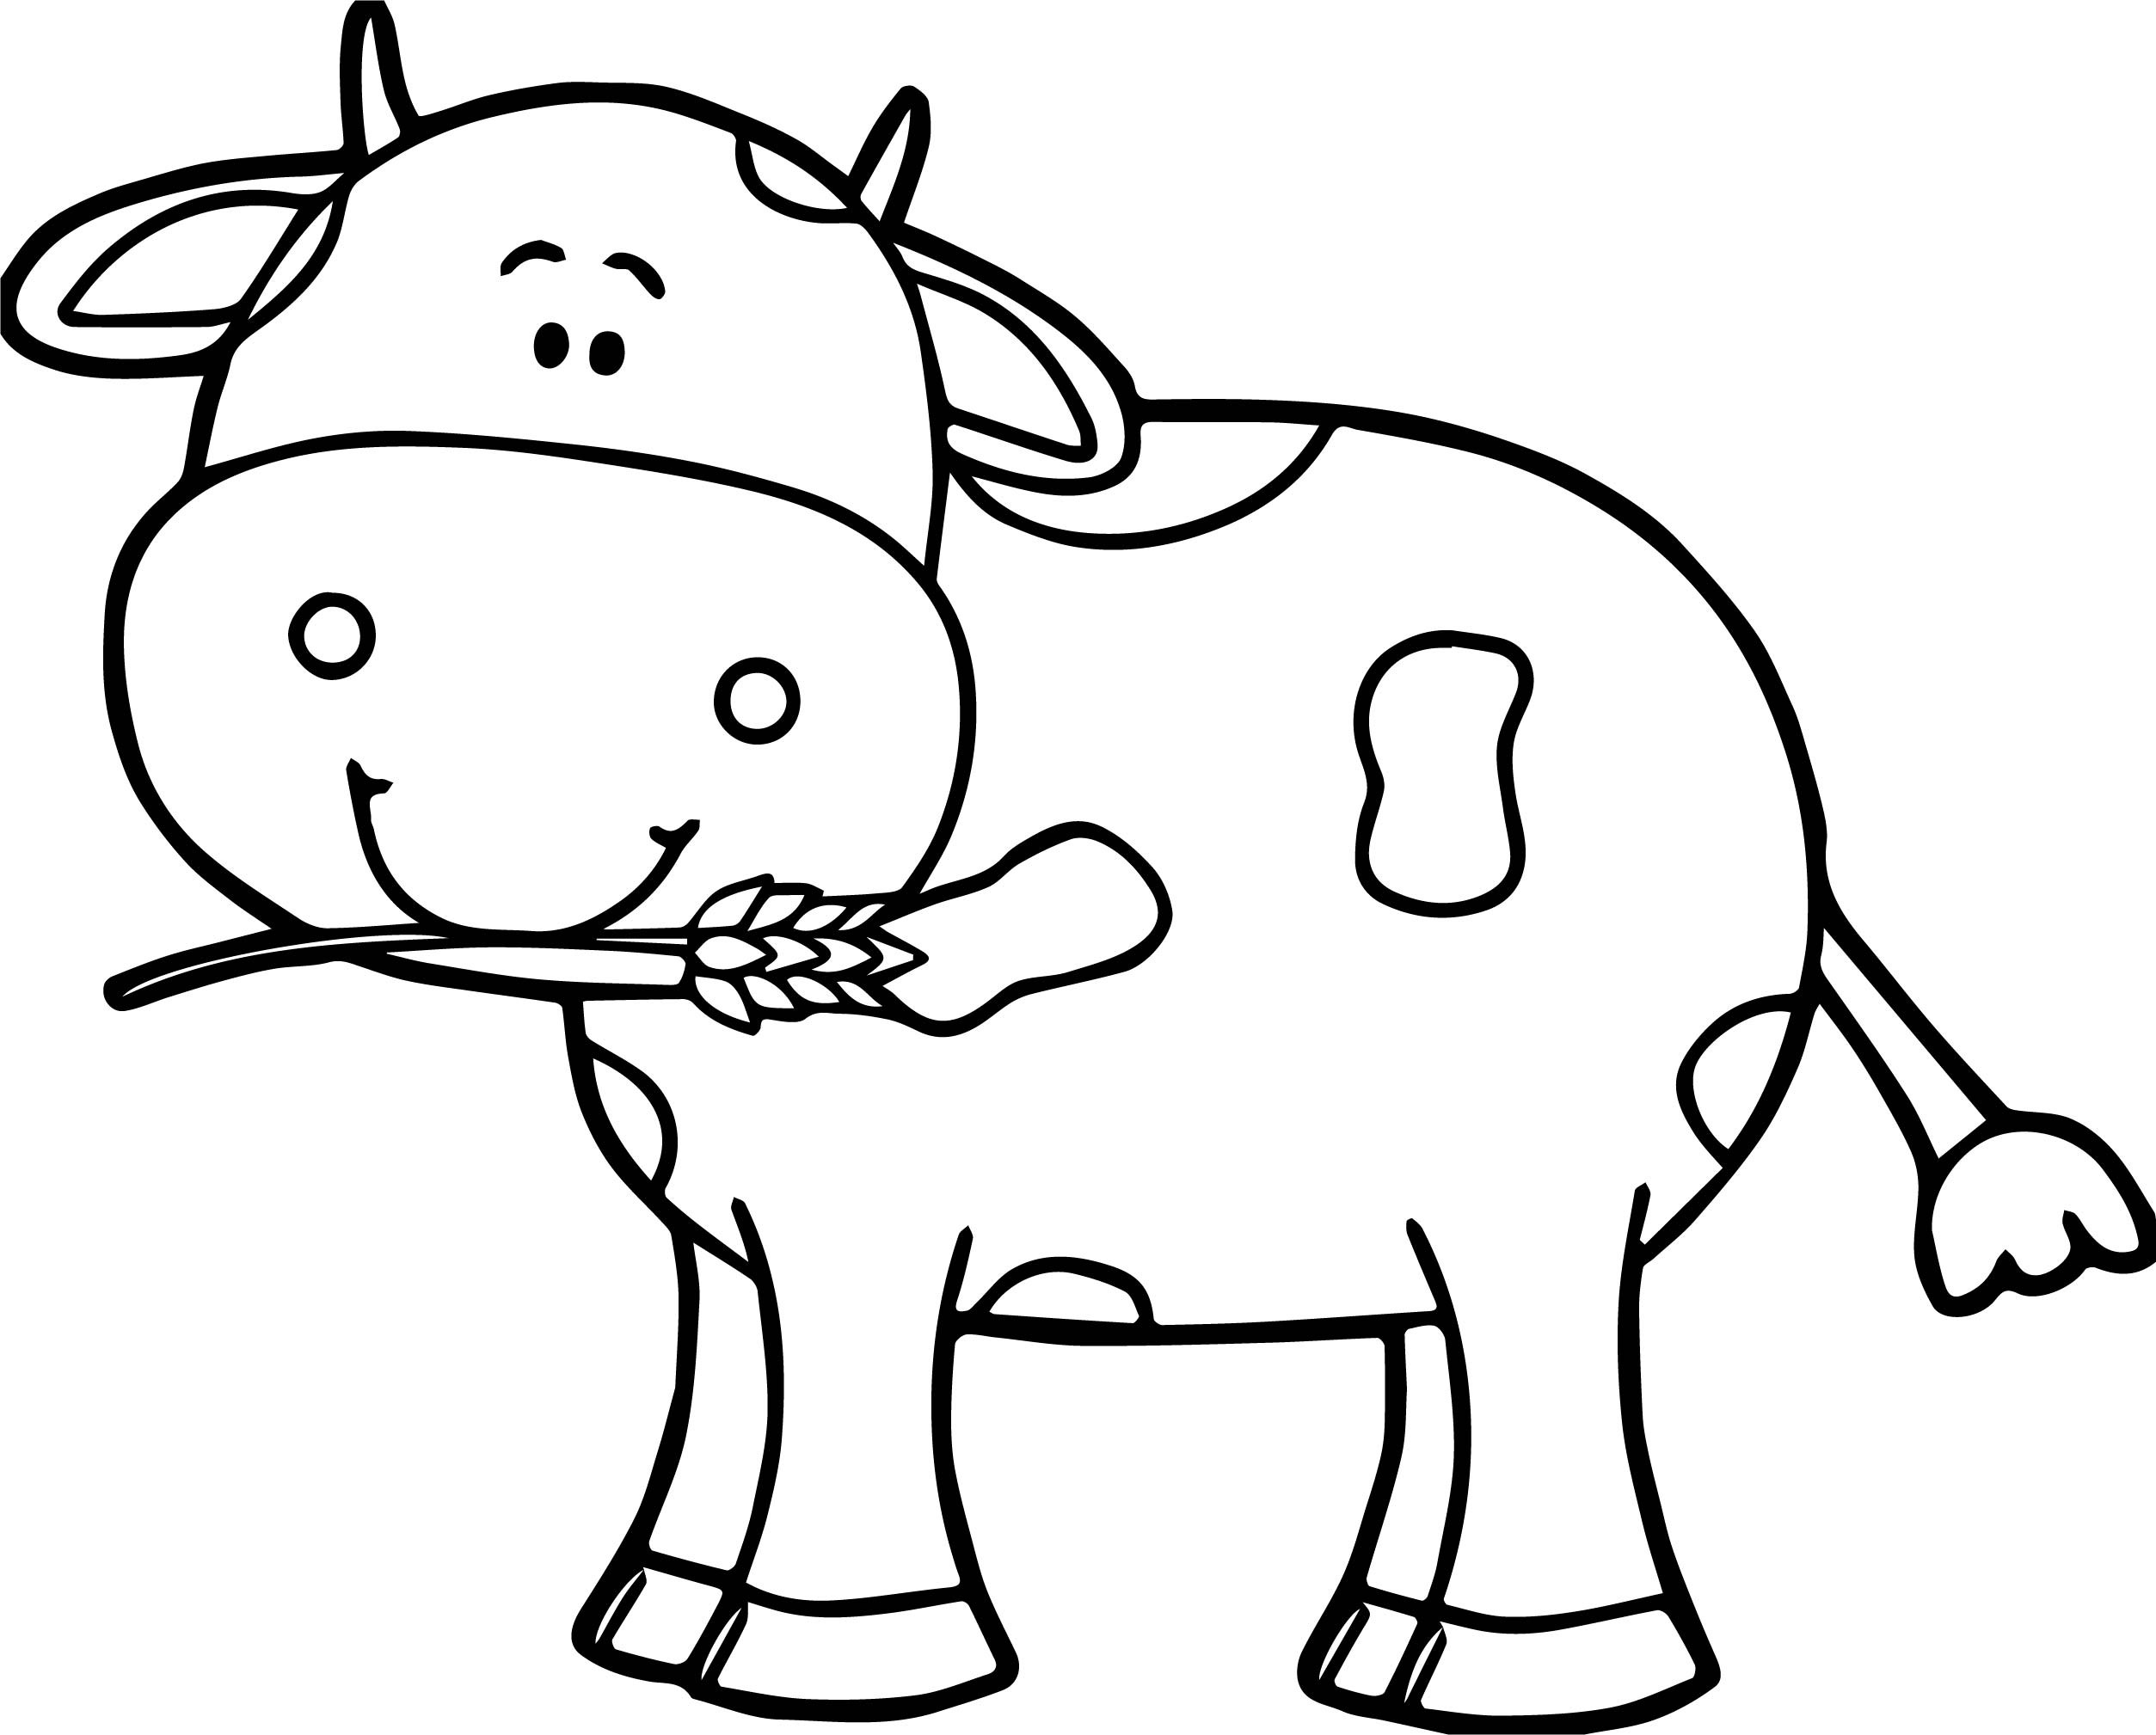 Cow Coloring Pages Free Printable
 Cute Cow Coloring Page